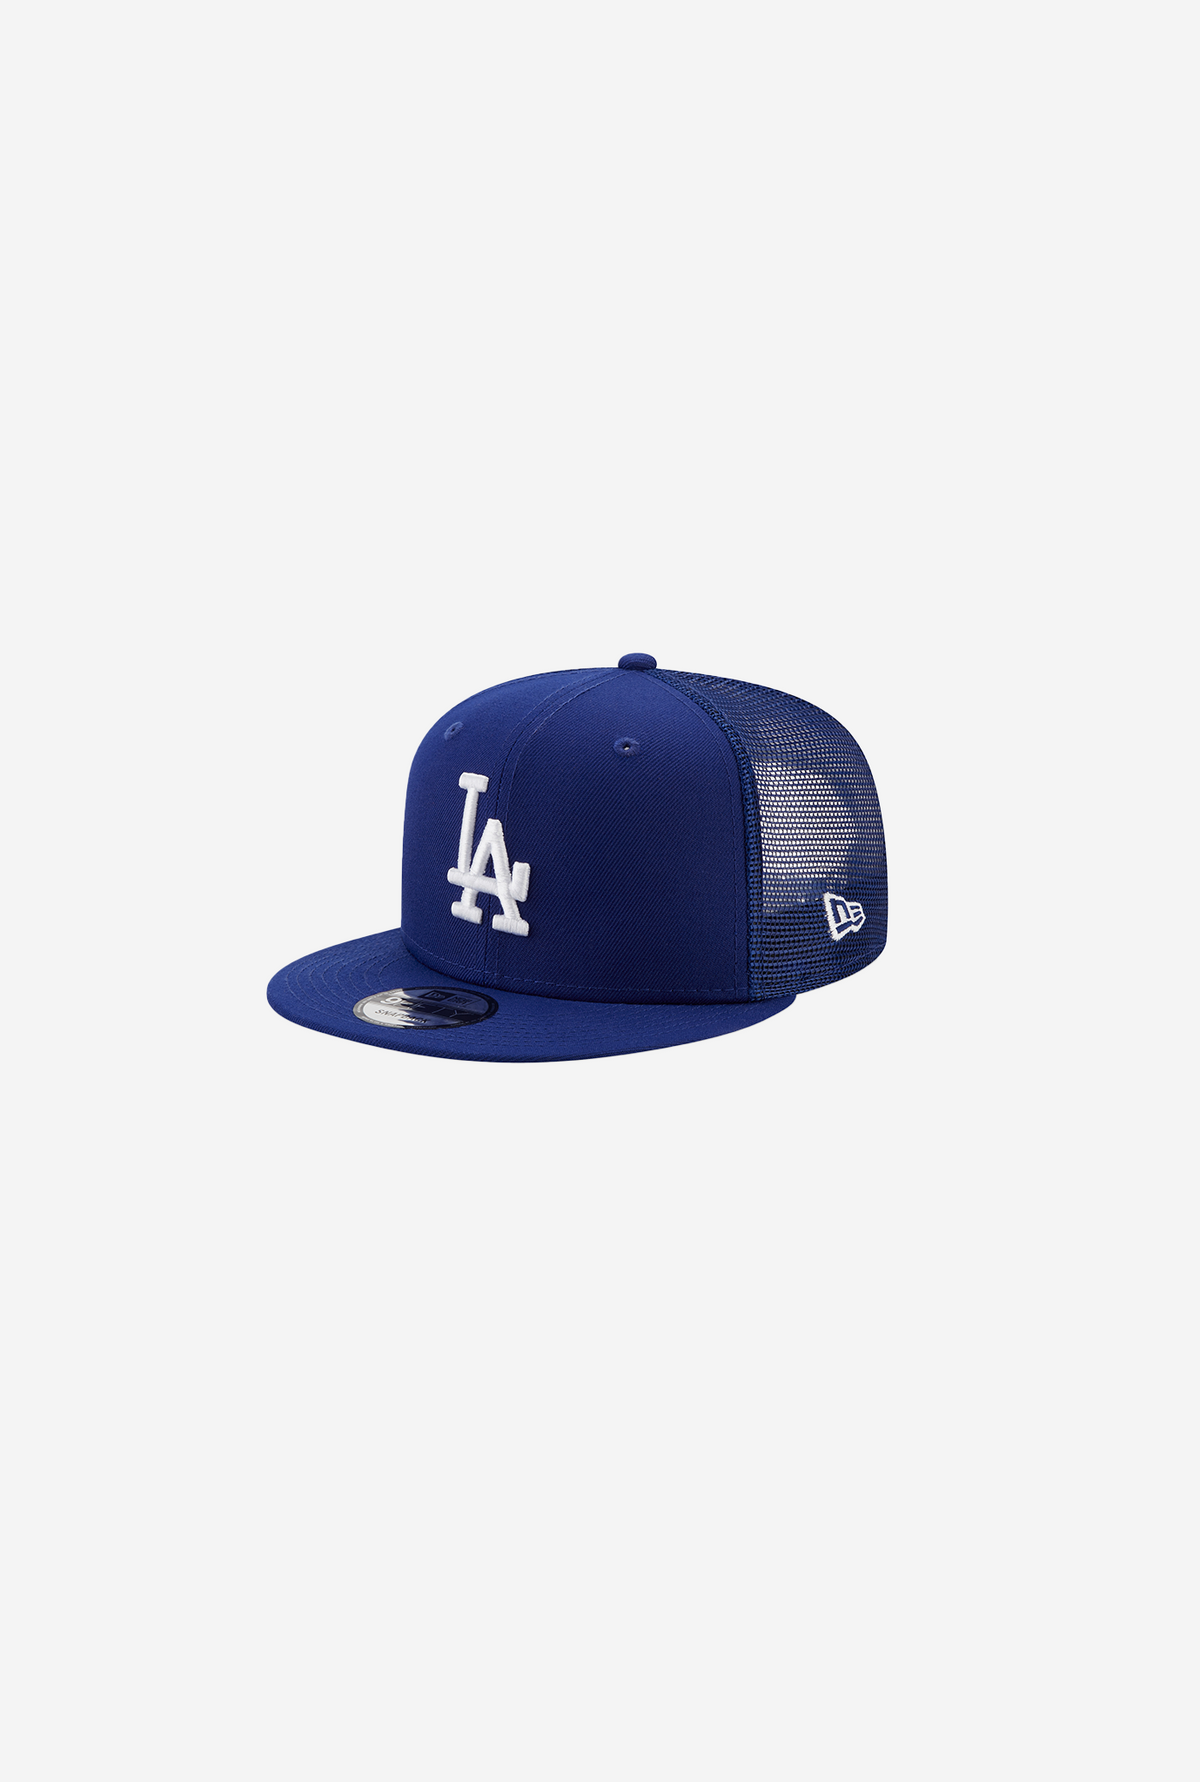 Los Angeles Dodgers 9FIFTY Classic Trucker - Royal